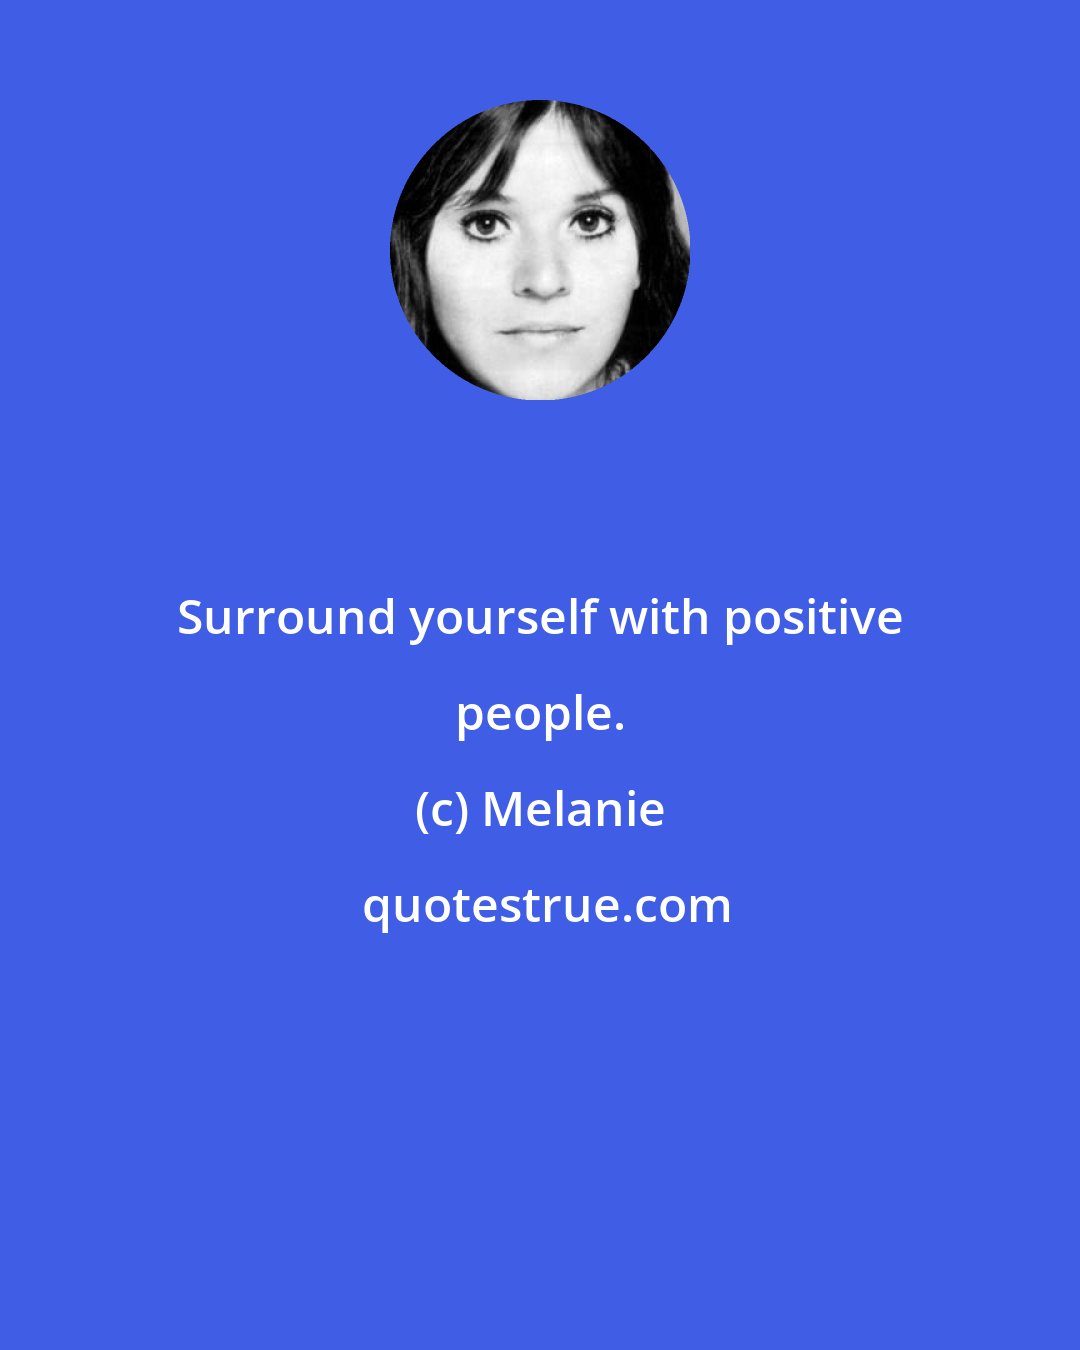 Melanie: Surround yourself with positive people.